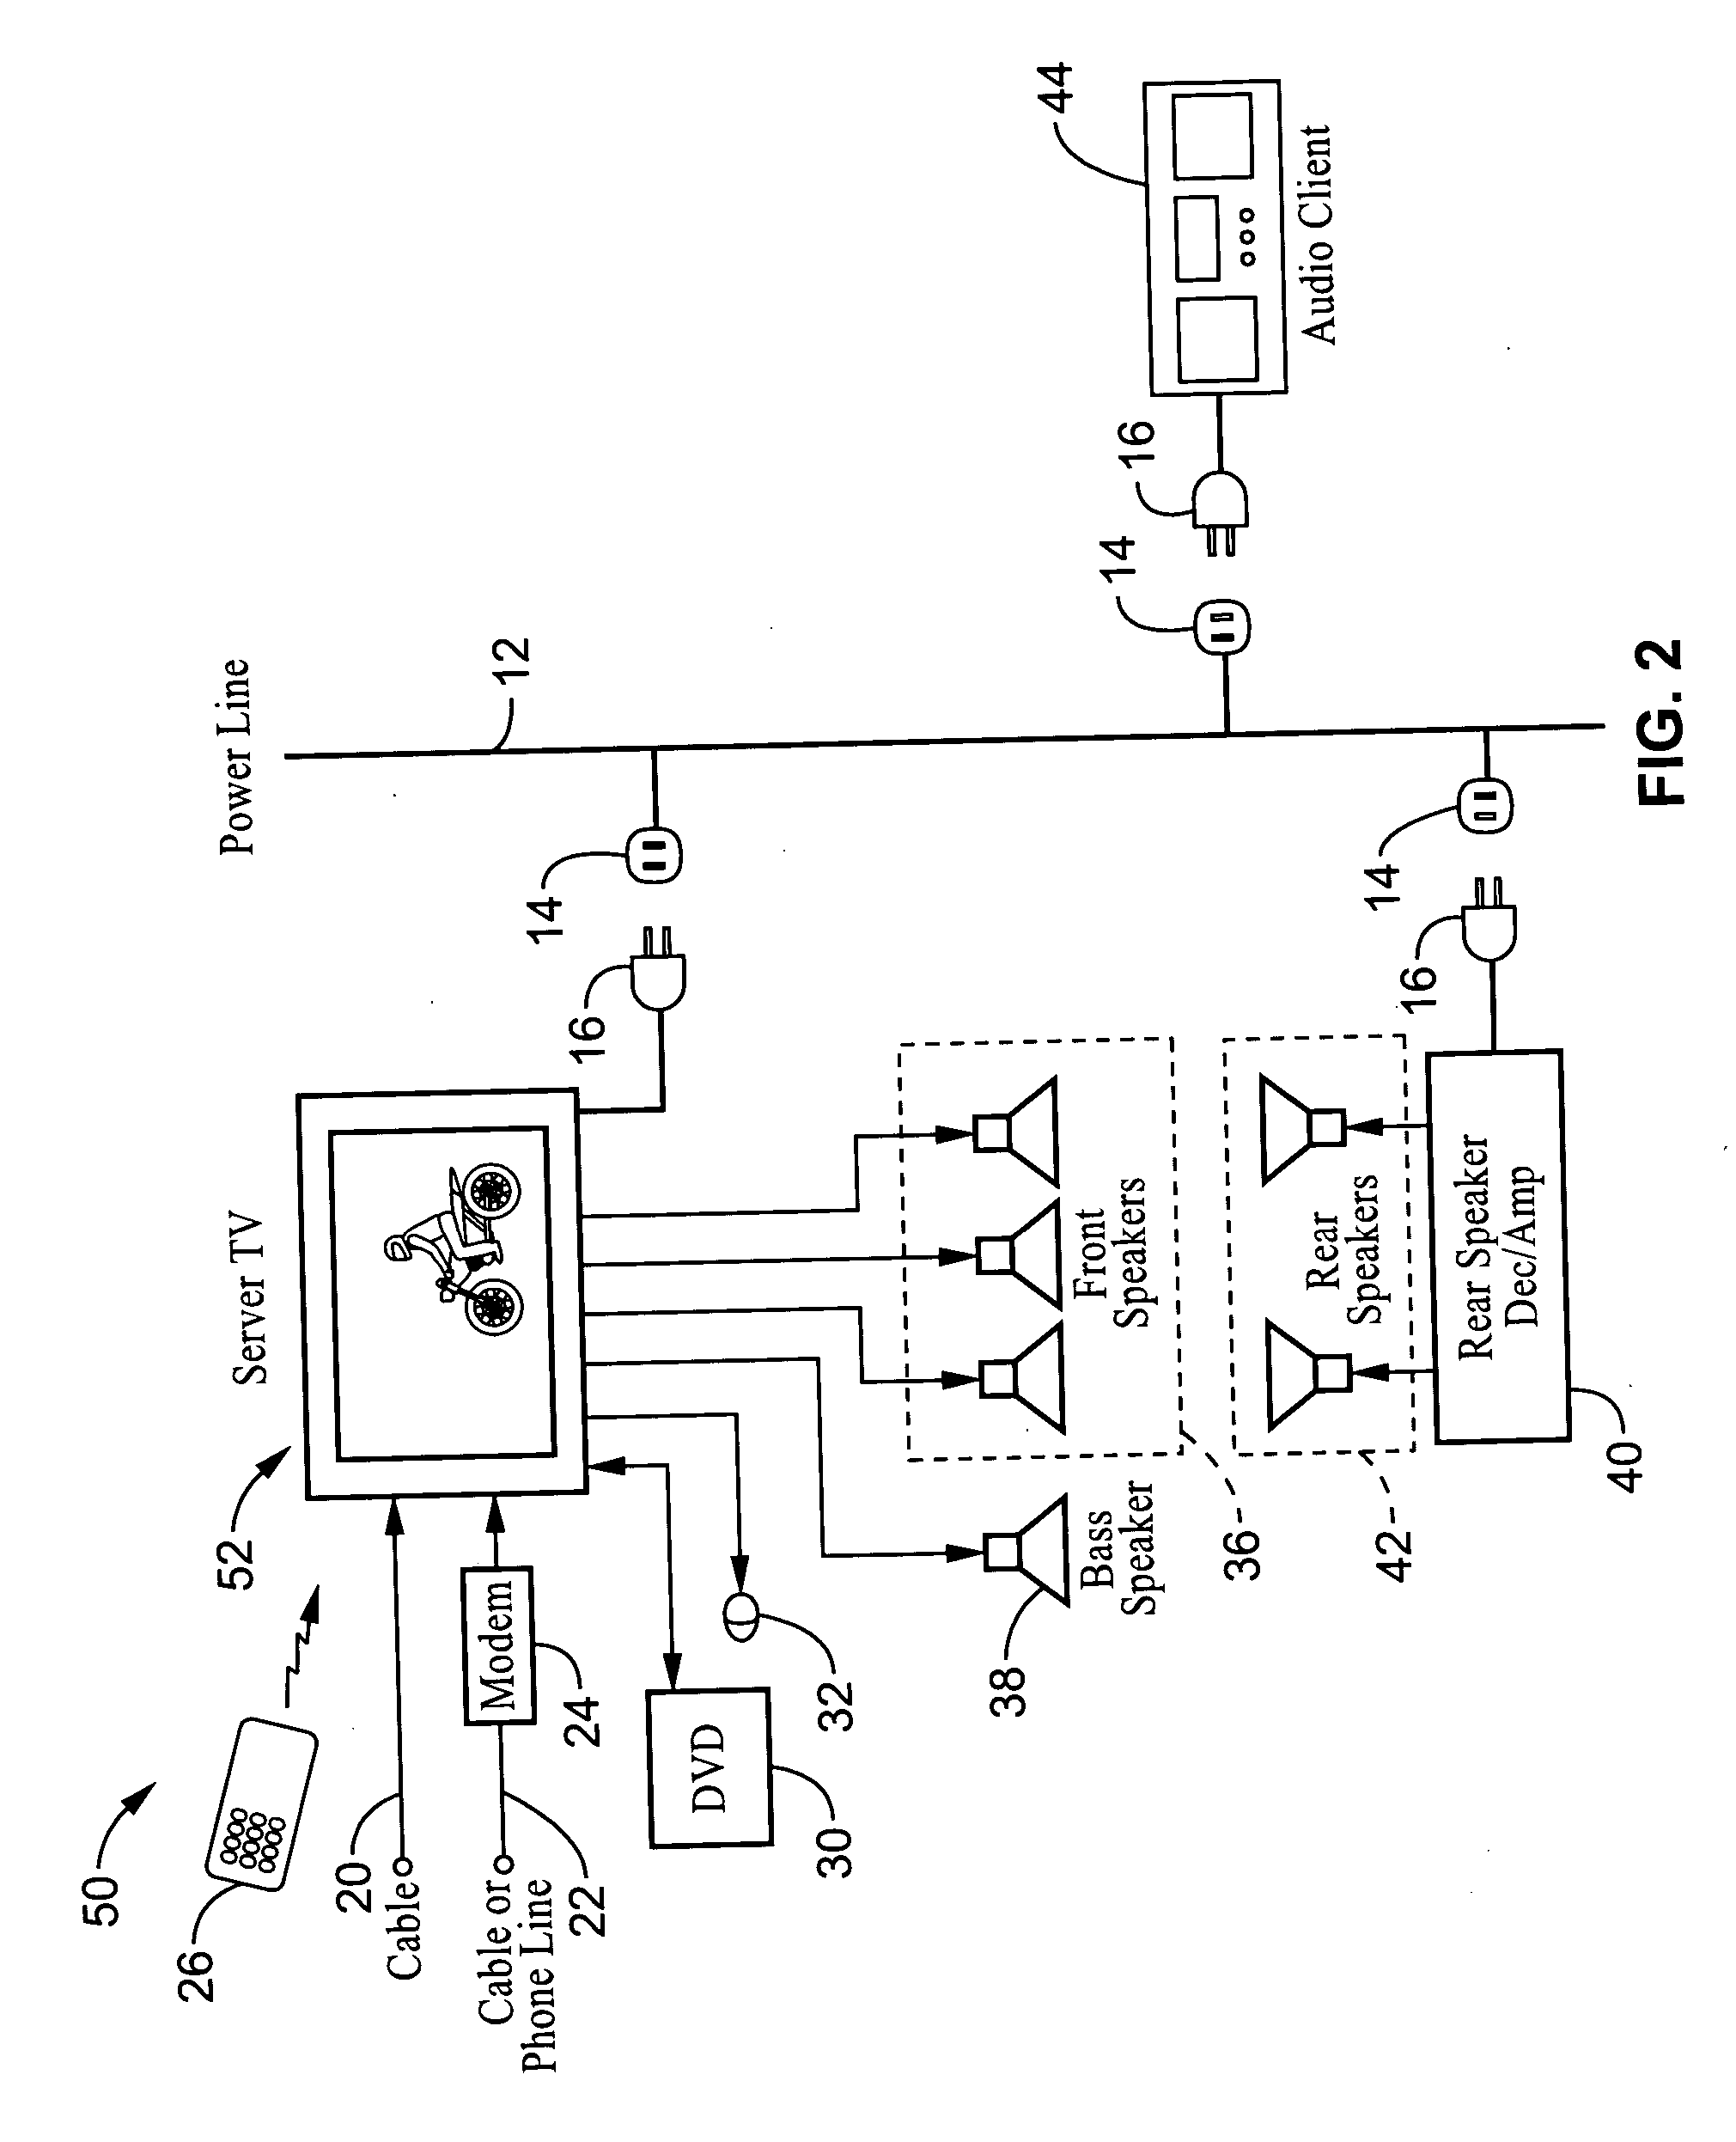 System and method for synchronizing audio-visual devices on a power line communications (PLC) network